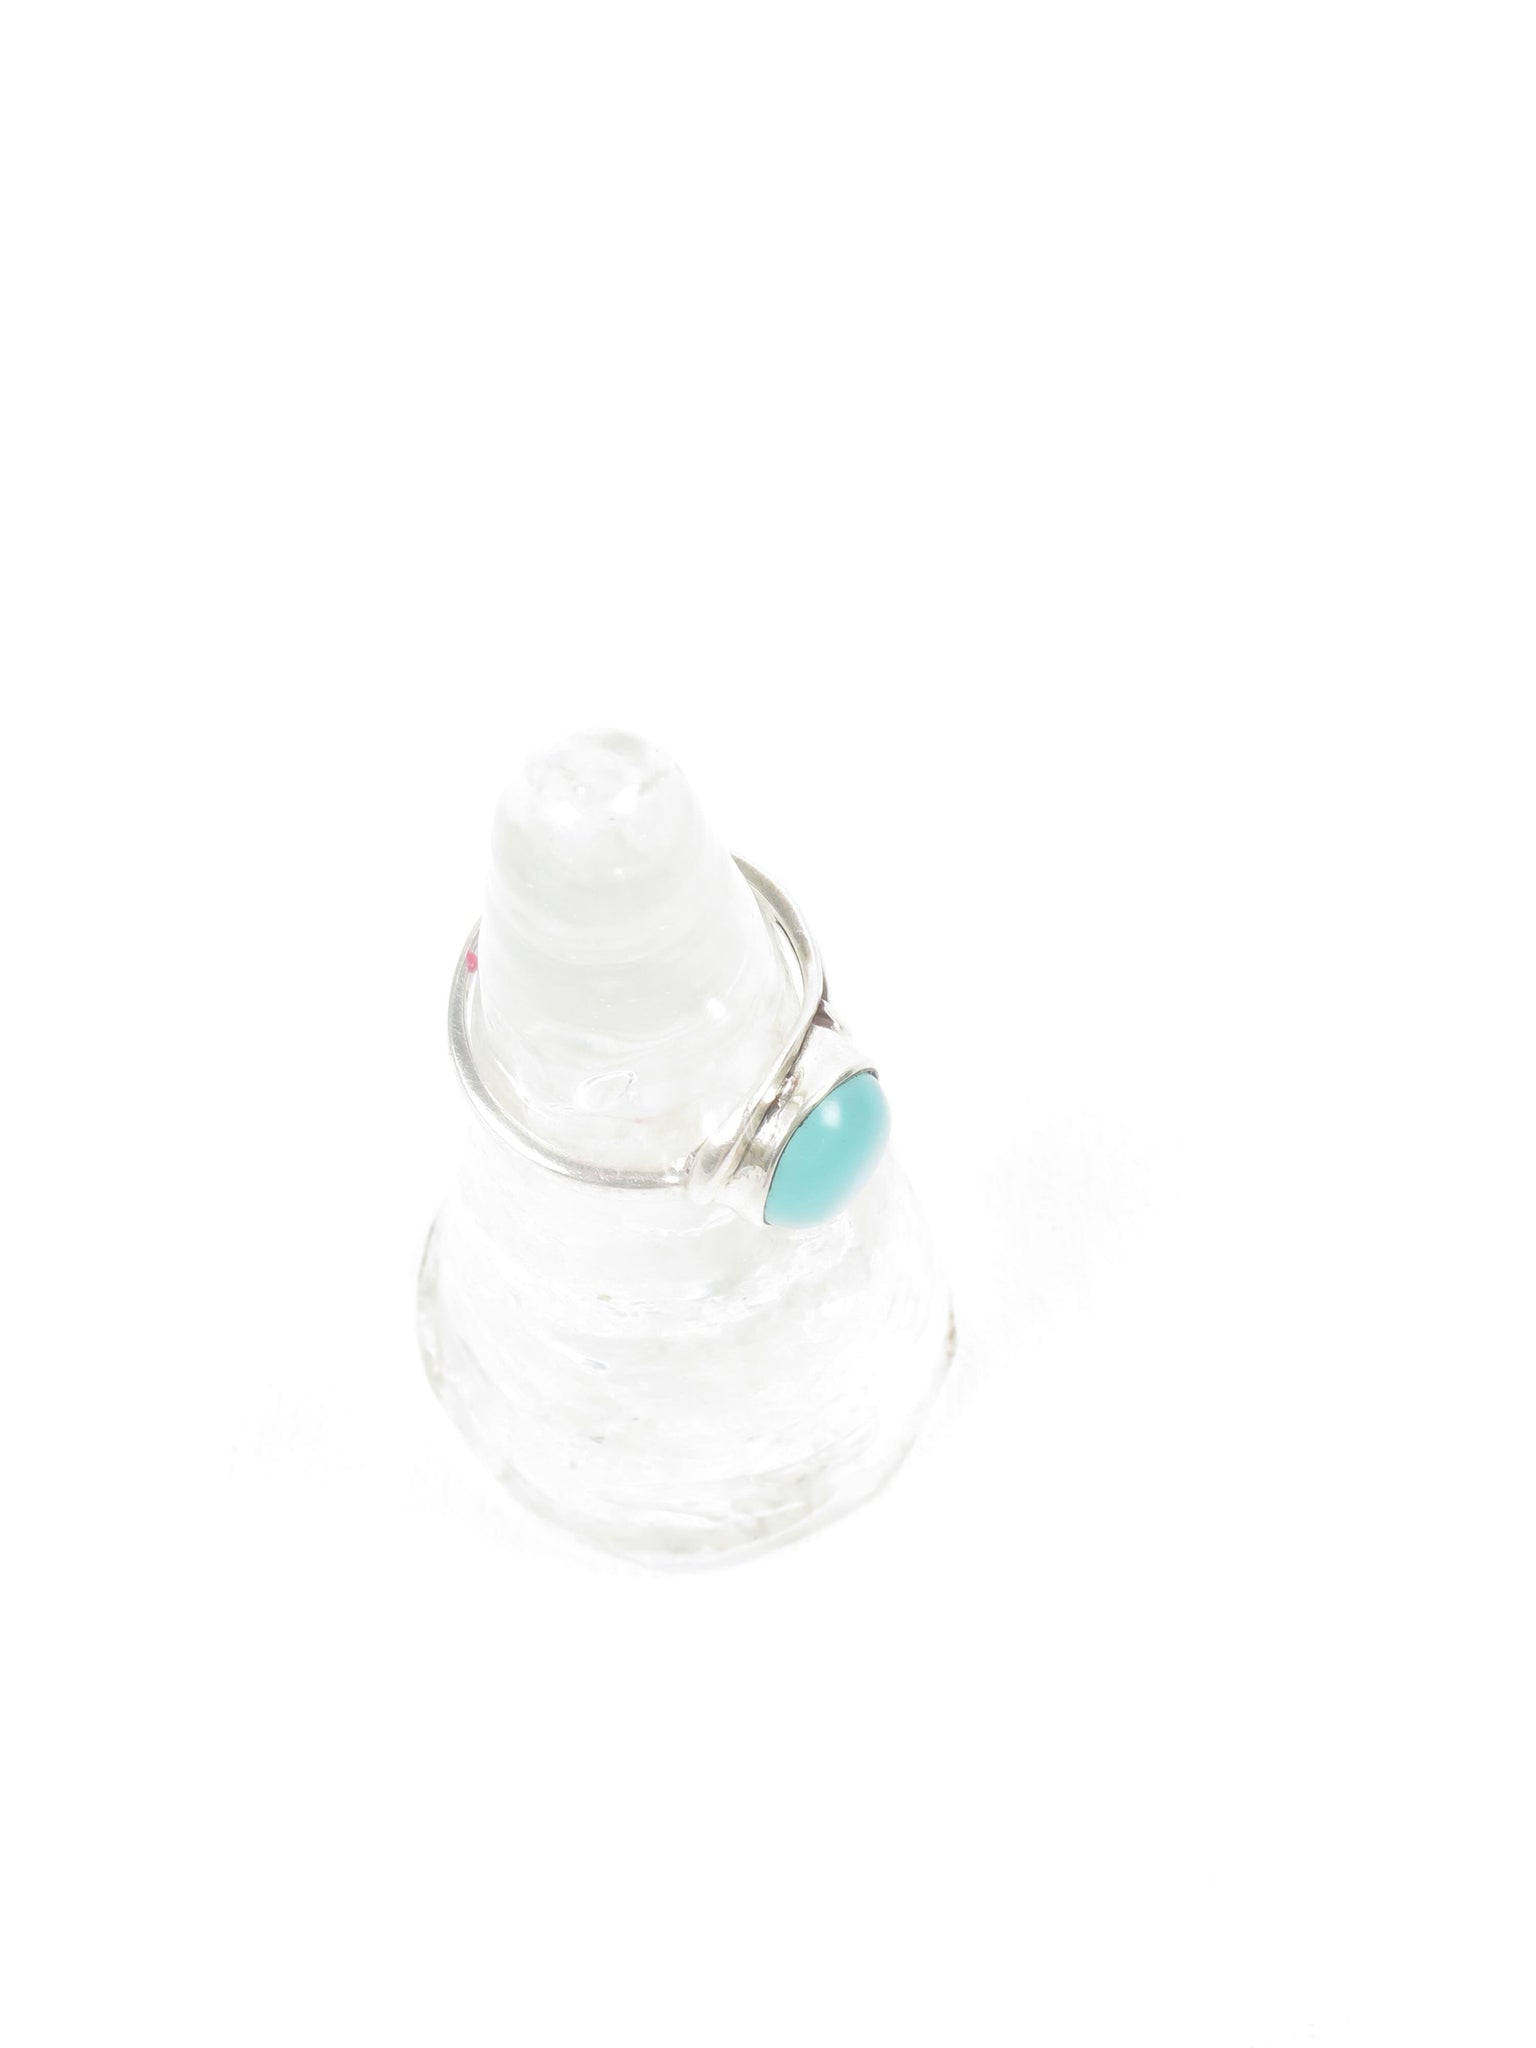 Silver & Chalcedony Ring Size P - The Harlequin